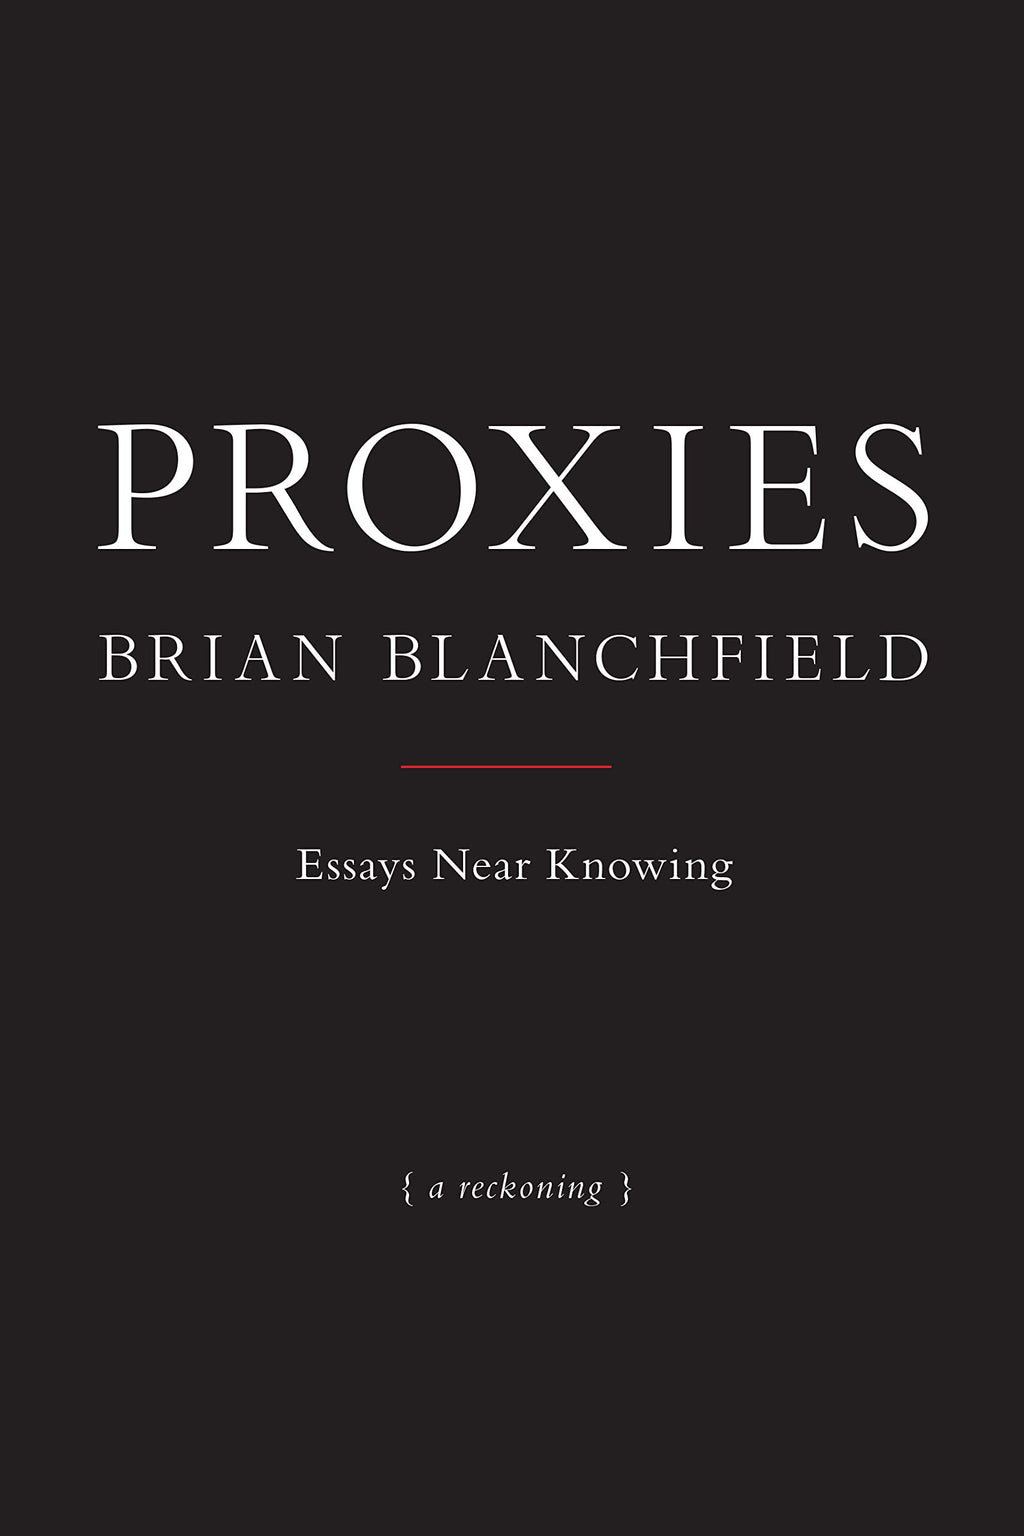 Proxies: Essays Near Knowing by Brian Blanchfield